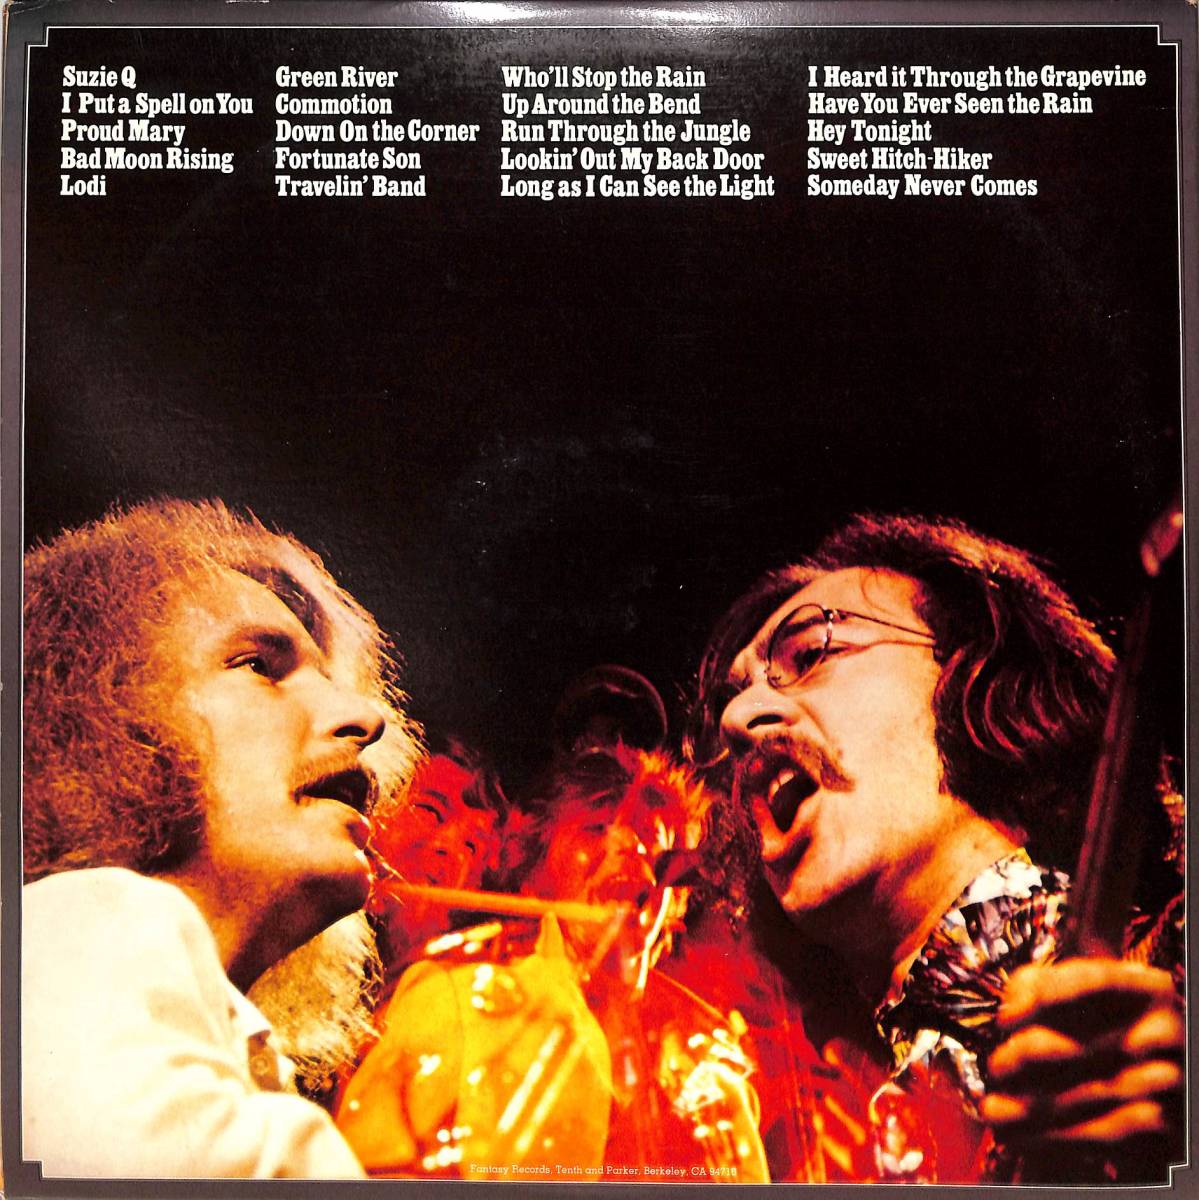 A00576666/LP2枚組/Creedence Clearwater Revival Featuring John Fogerty「Chronicle - The 20 Greatest Hits（1976年・CCR-2）」_画像2